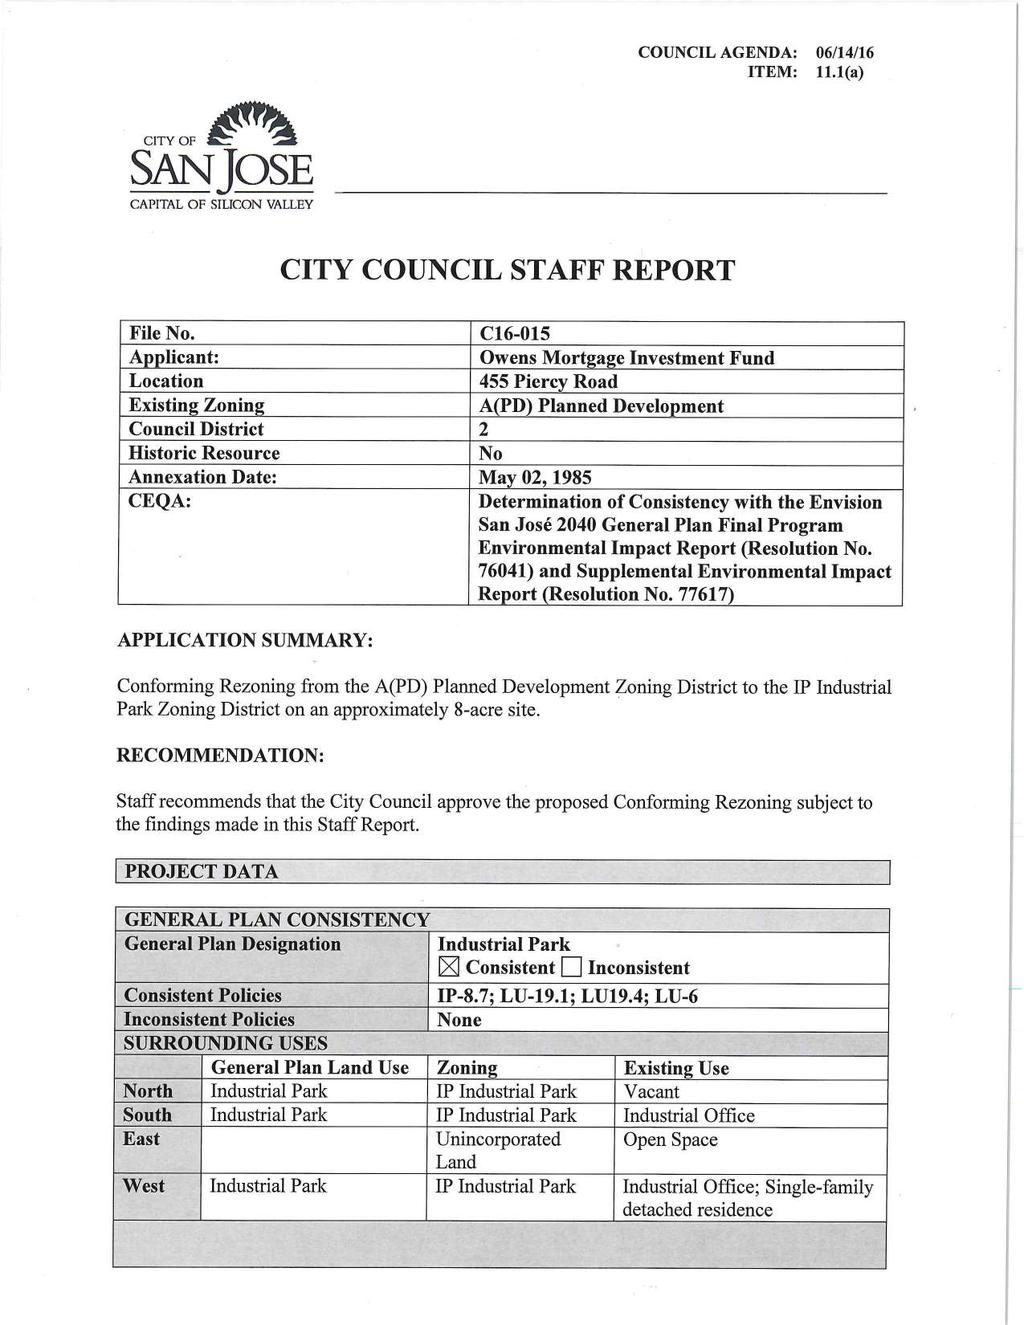 COUNCIL AGENDA: 06/14/16 ITEM: 11.1(a) CITY OF ffr -3 SANjOSE CAPITAL OF SILICON VALLEY CITY COUNCIL STAFF REPORT File No.